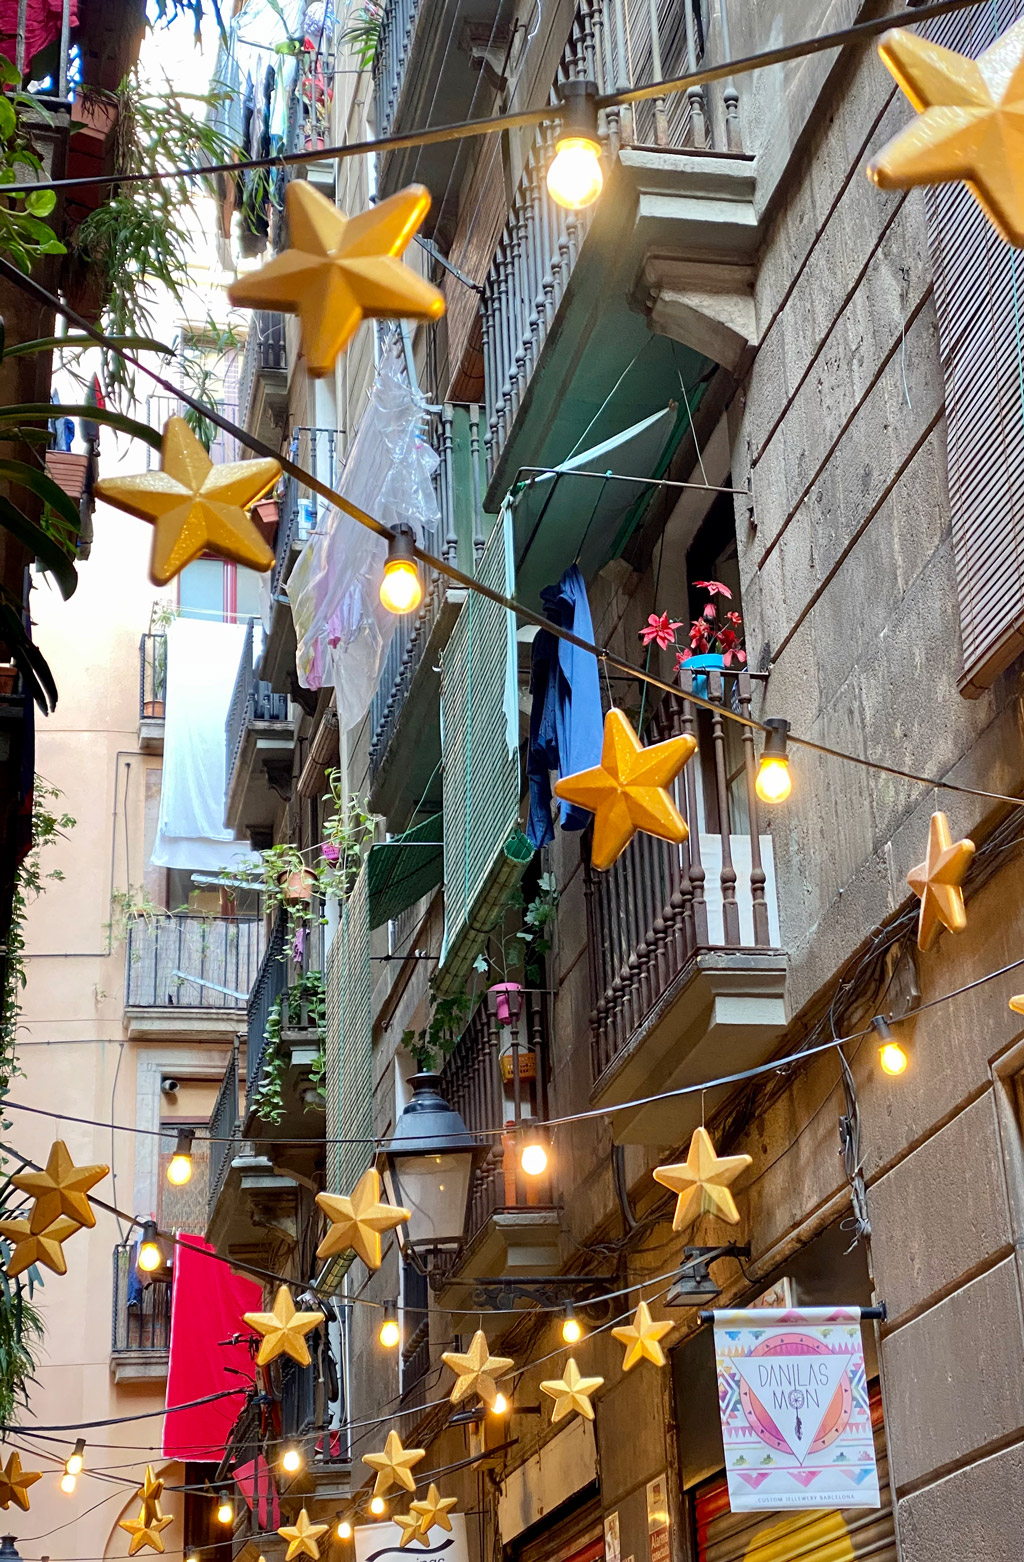 Streets of Barcelona are all decked up for the holidays.